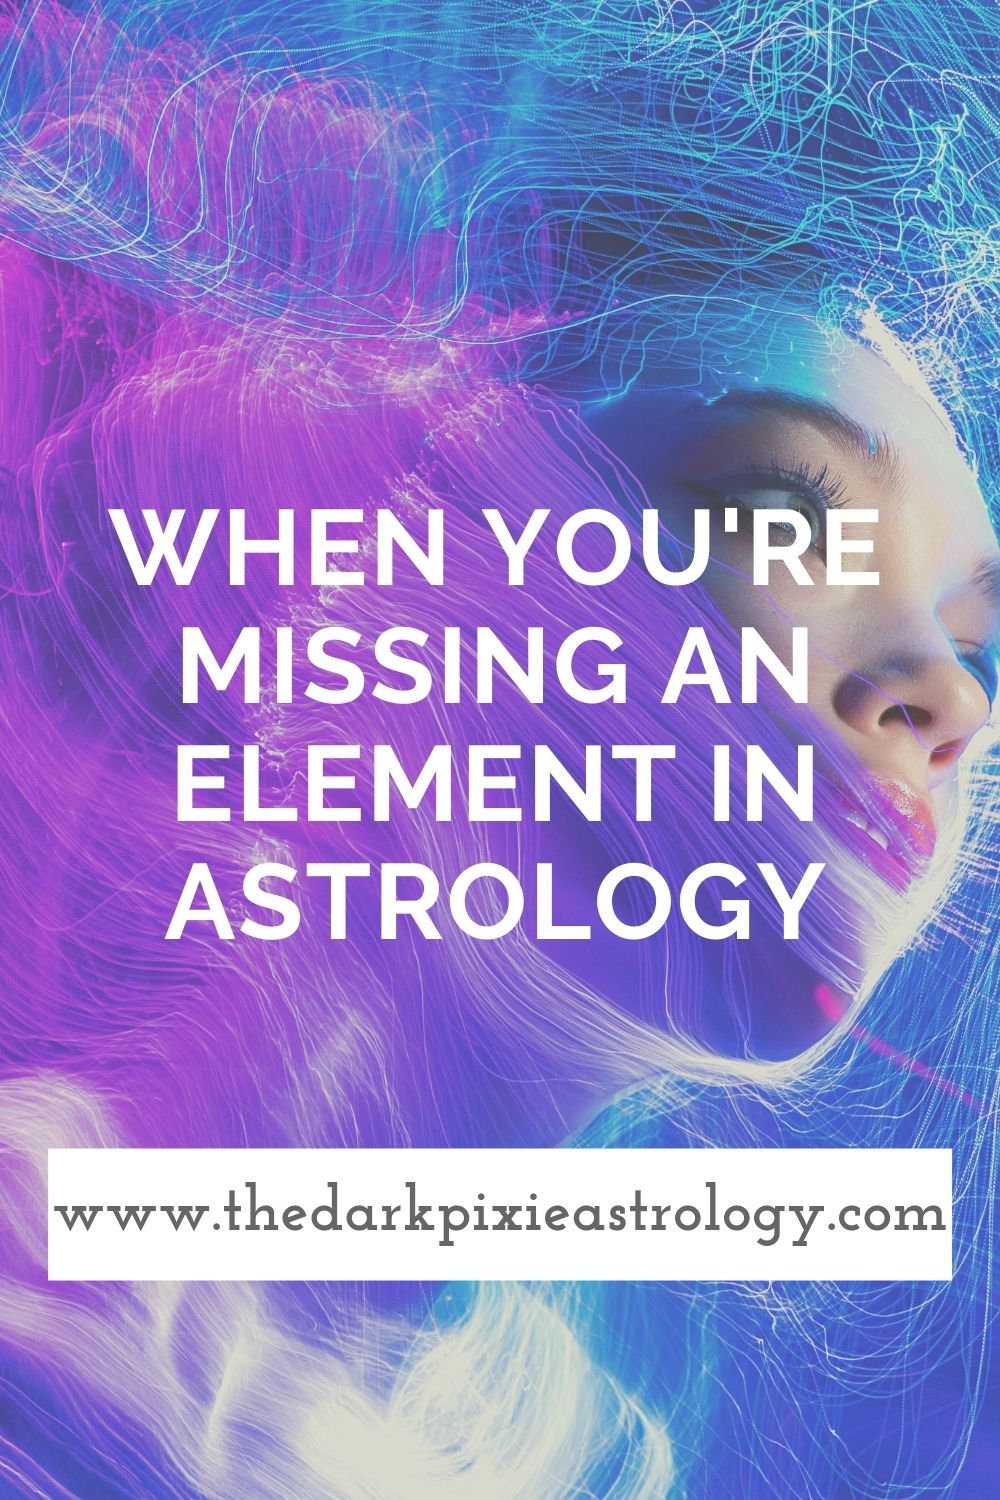 When You're Missing An Element in Astrology - The Dark Pixie Astrology